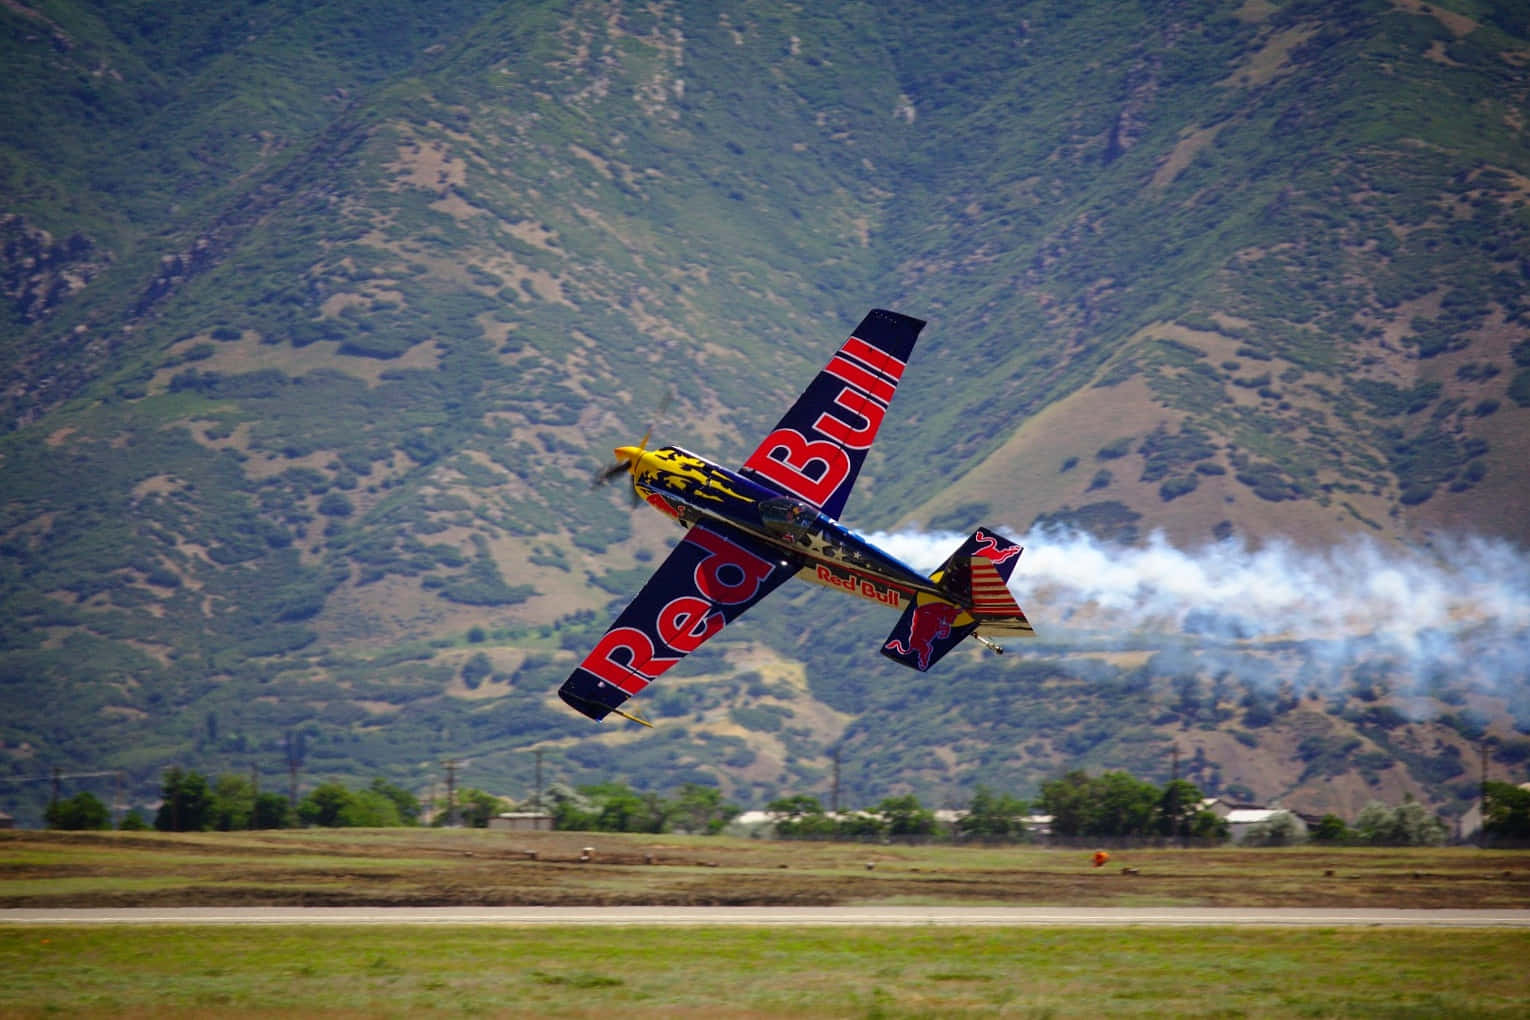 Discover the extreme energy of Red Bull.